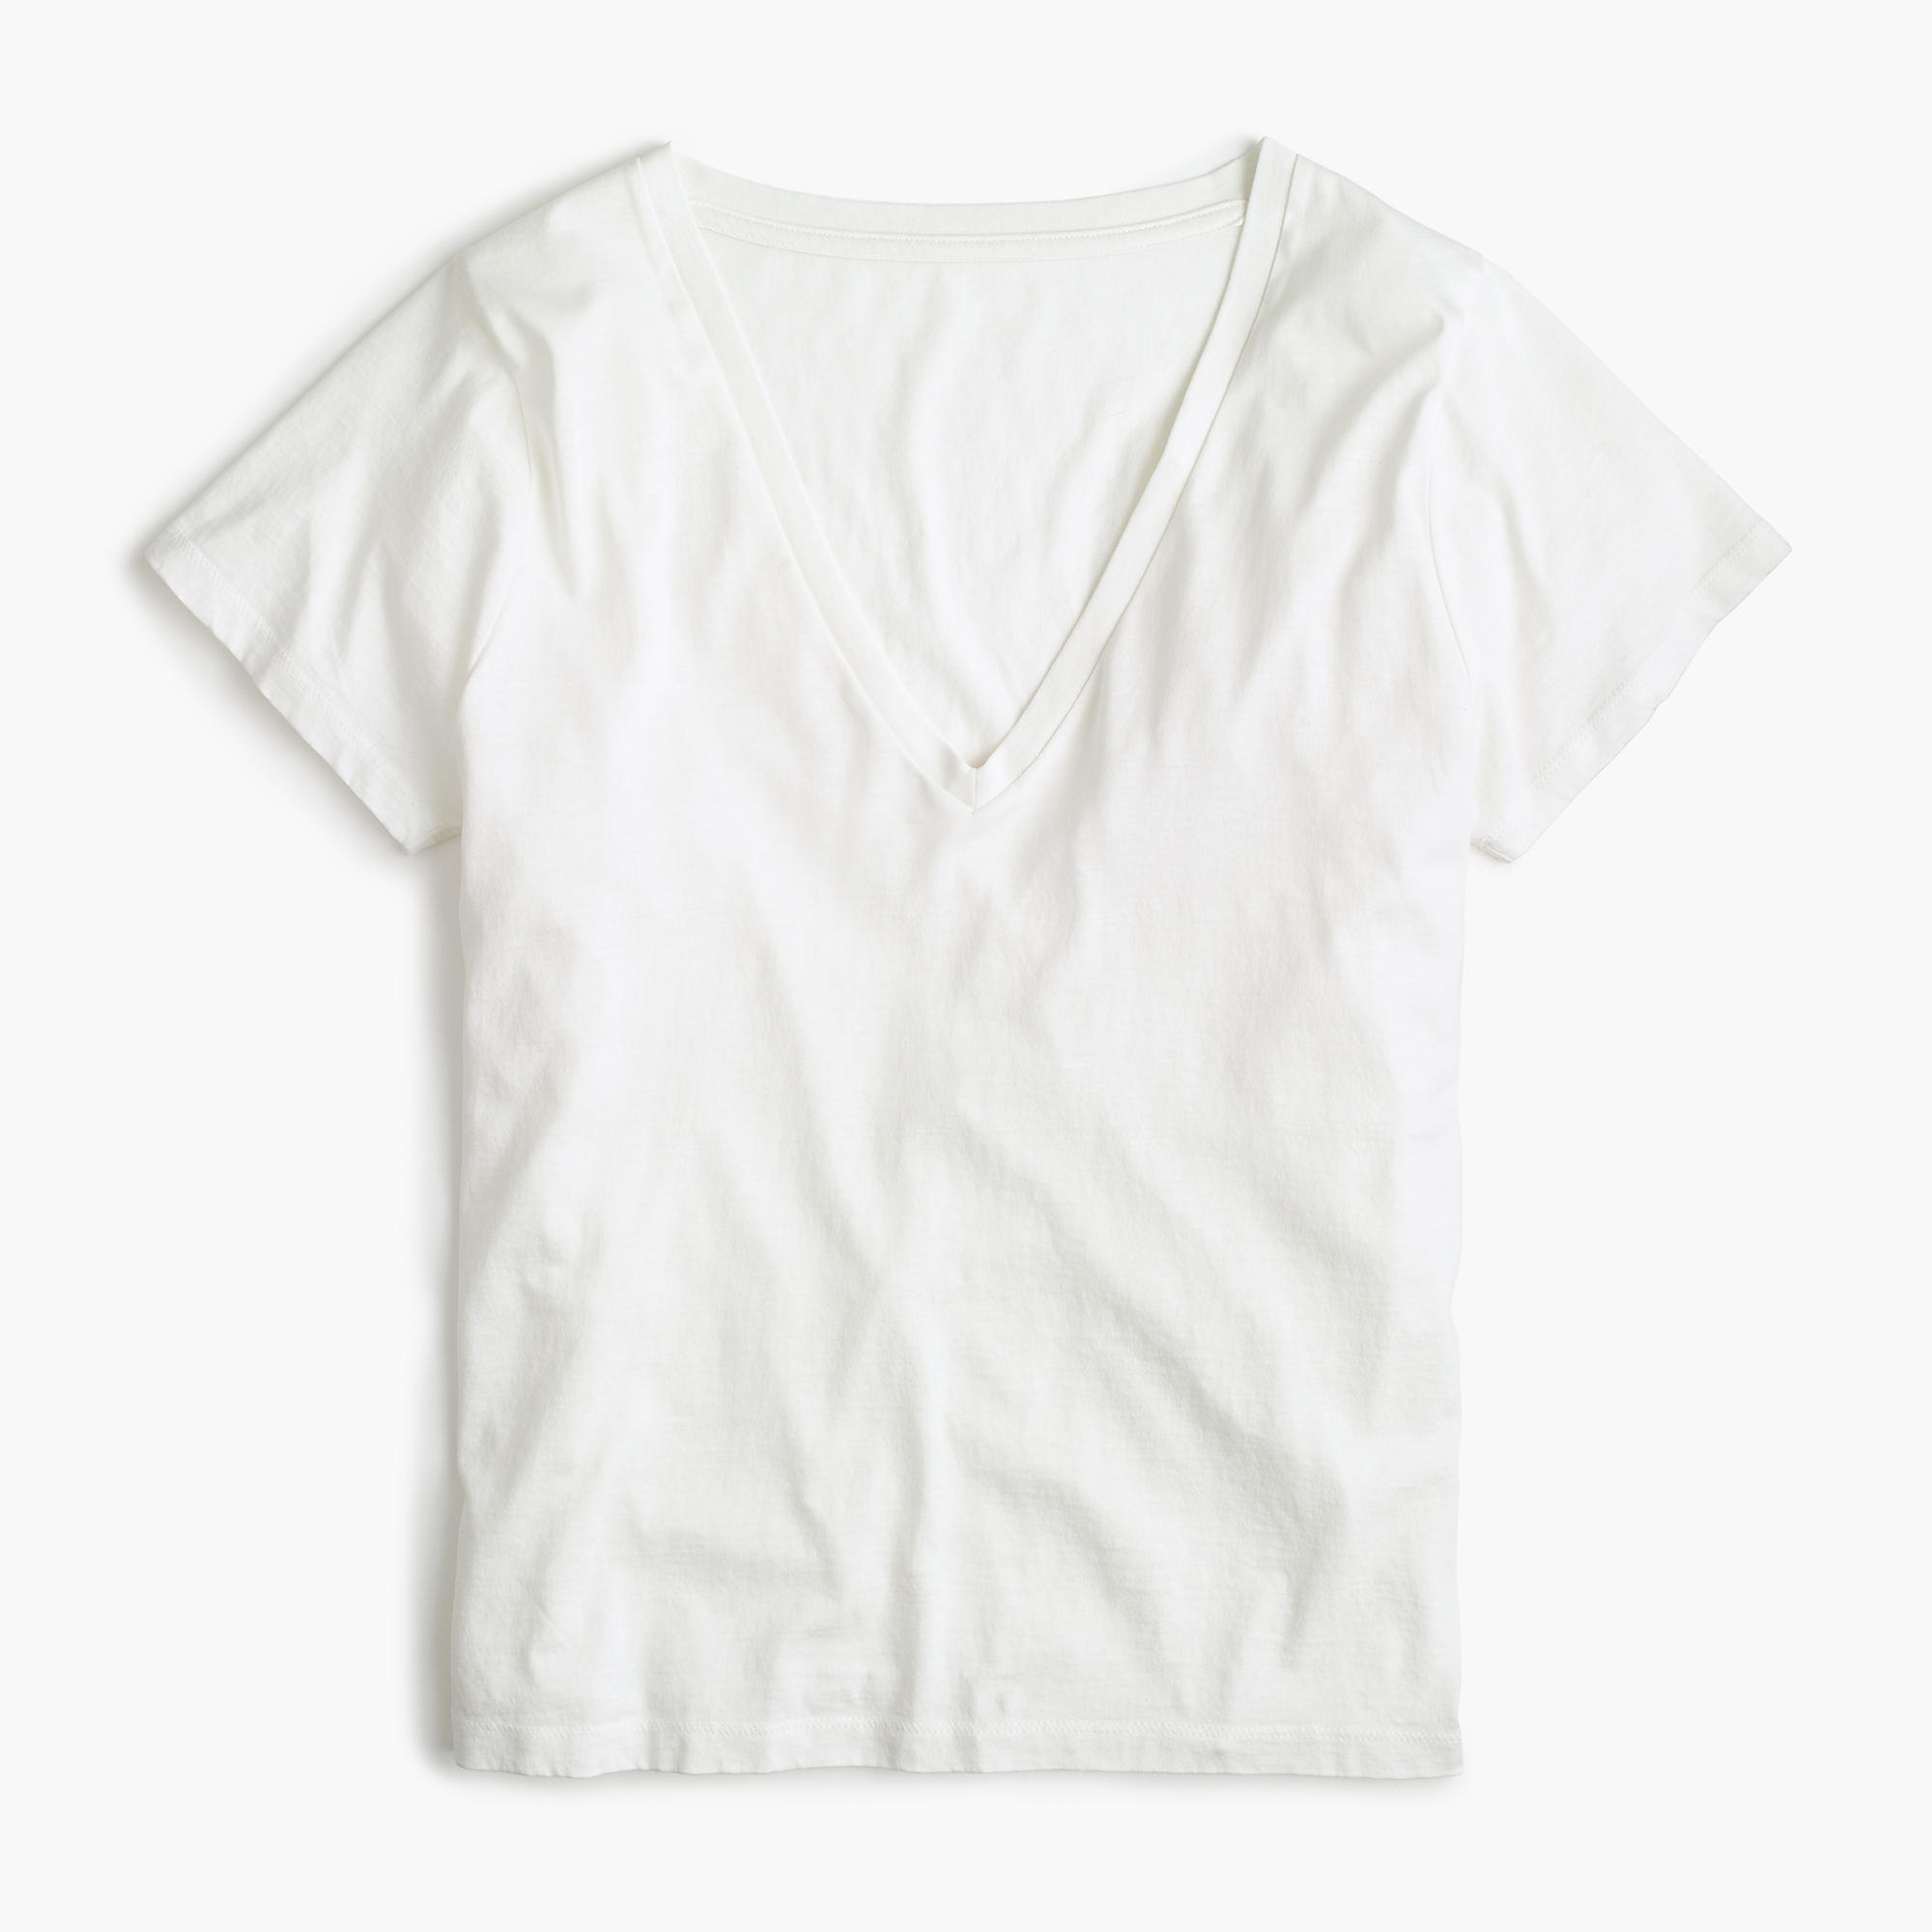 The best white t-shirts for women from a t-shirt junkie. Hurry...big sales!